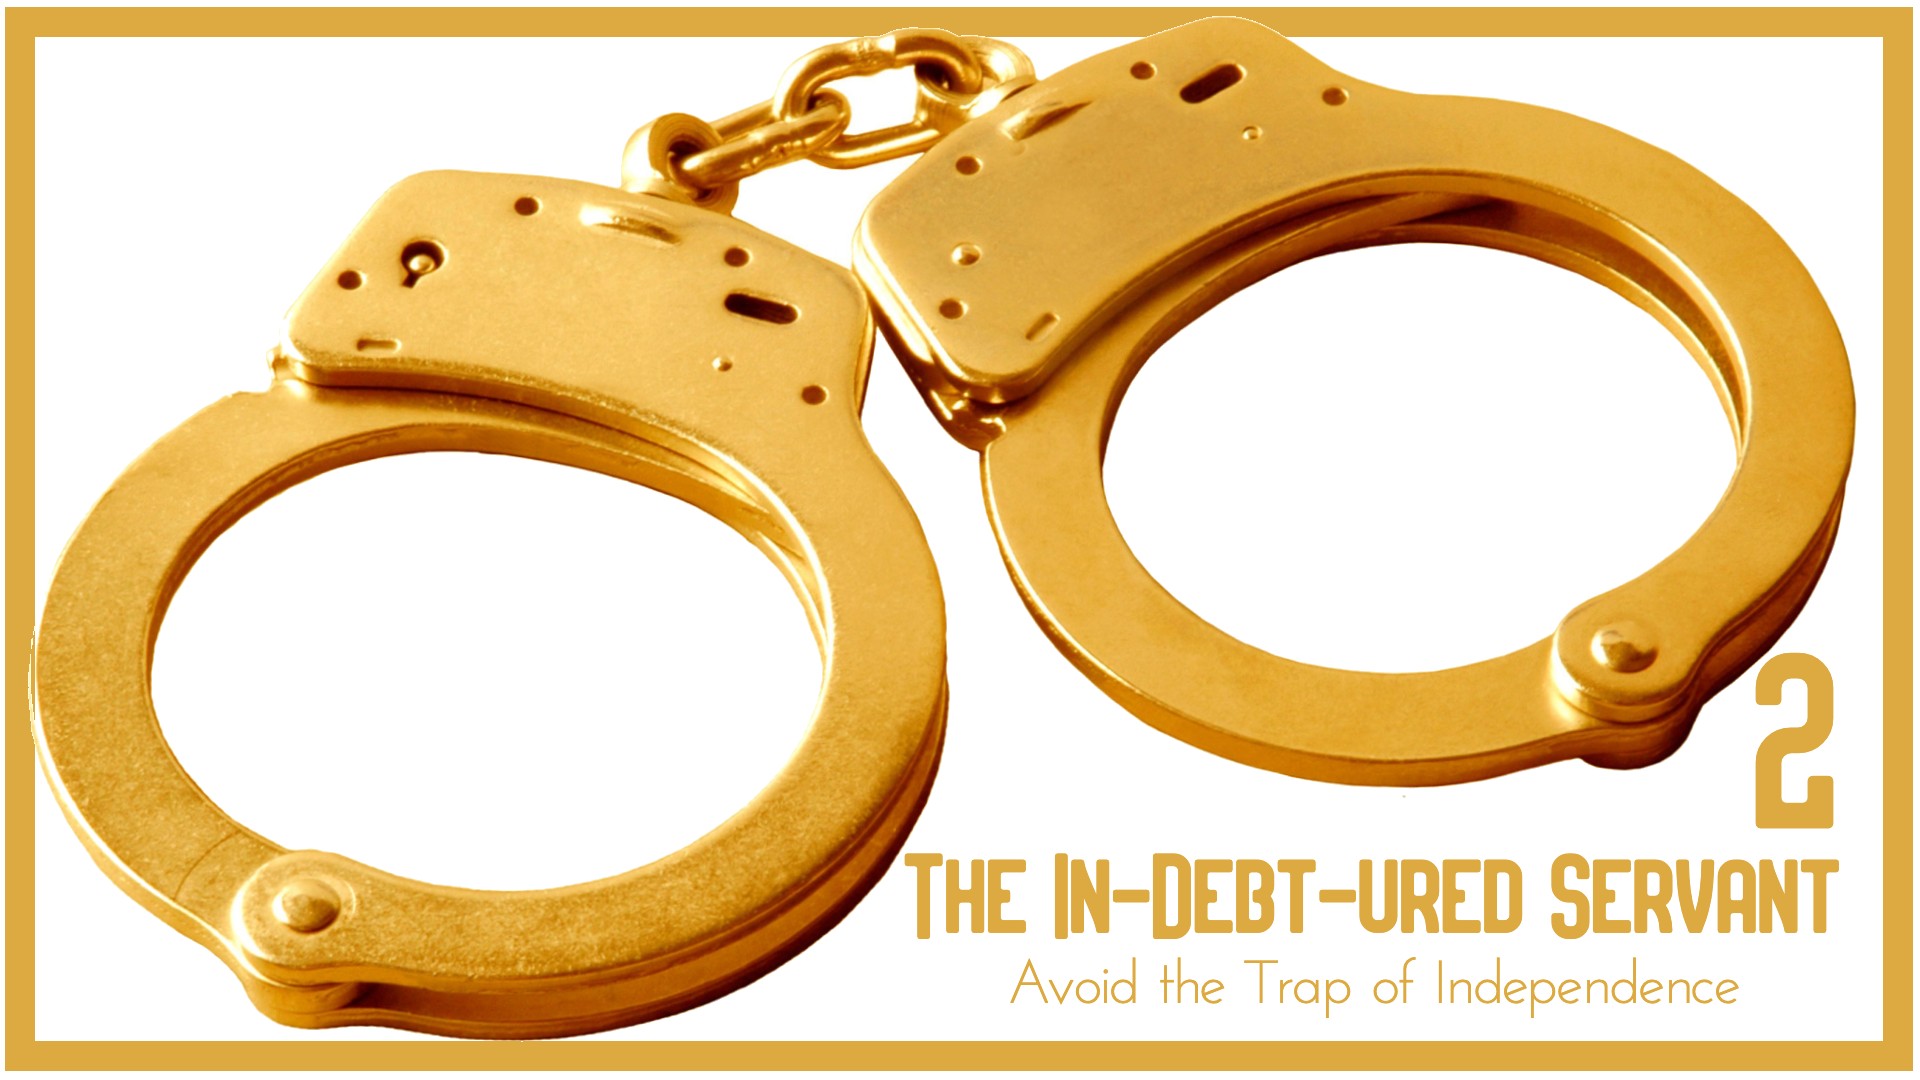 The In-Debt-ured Servant 2: Avoid the Trap of Independence